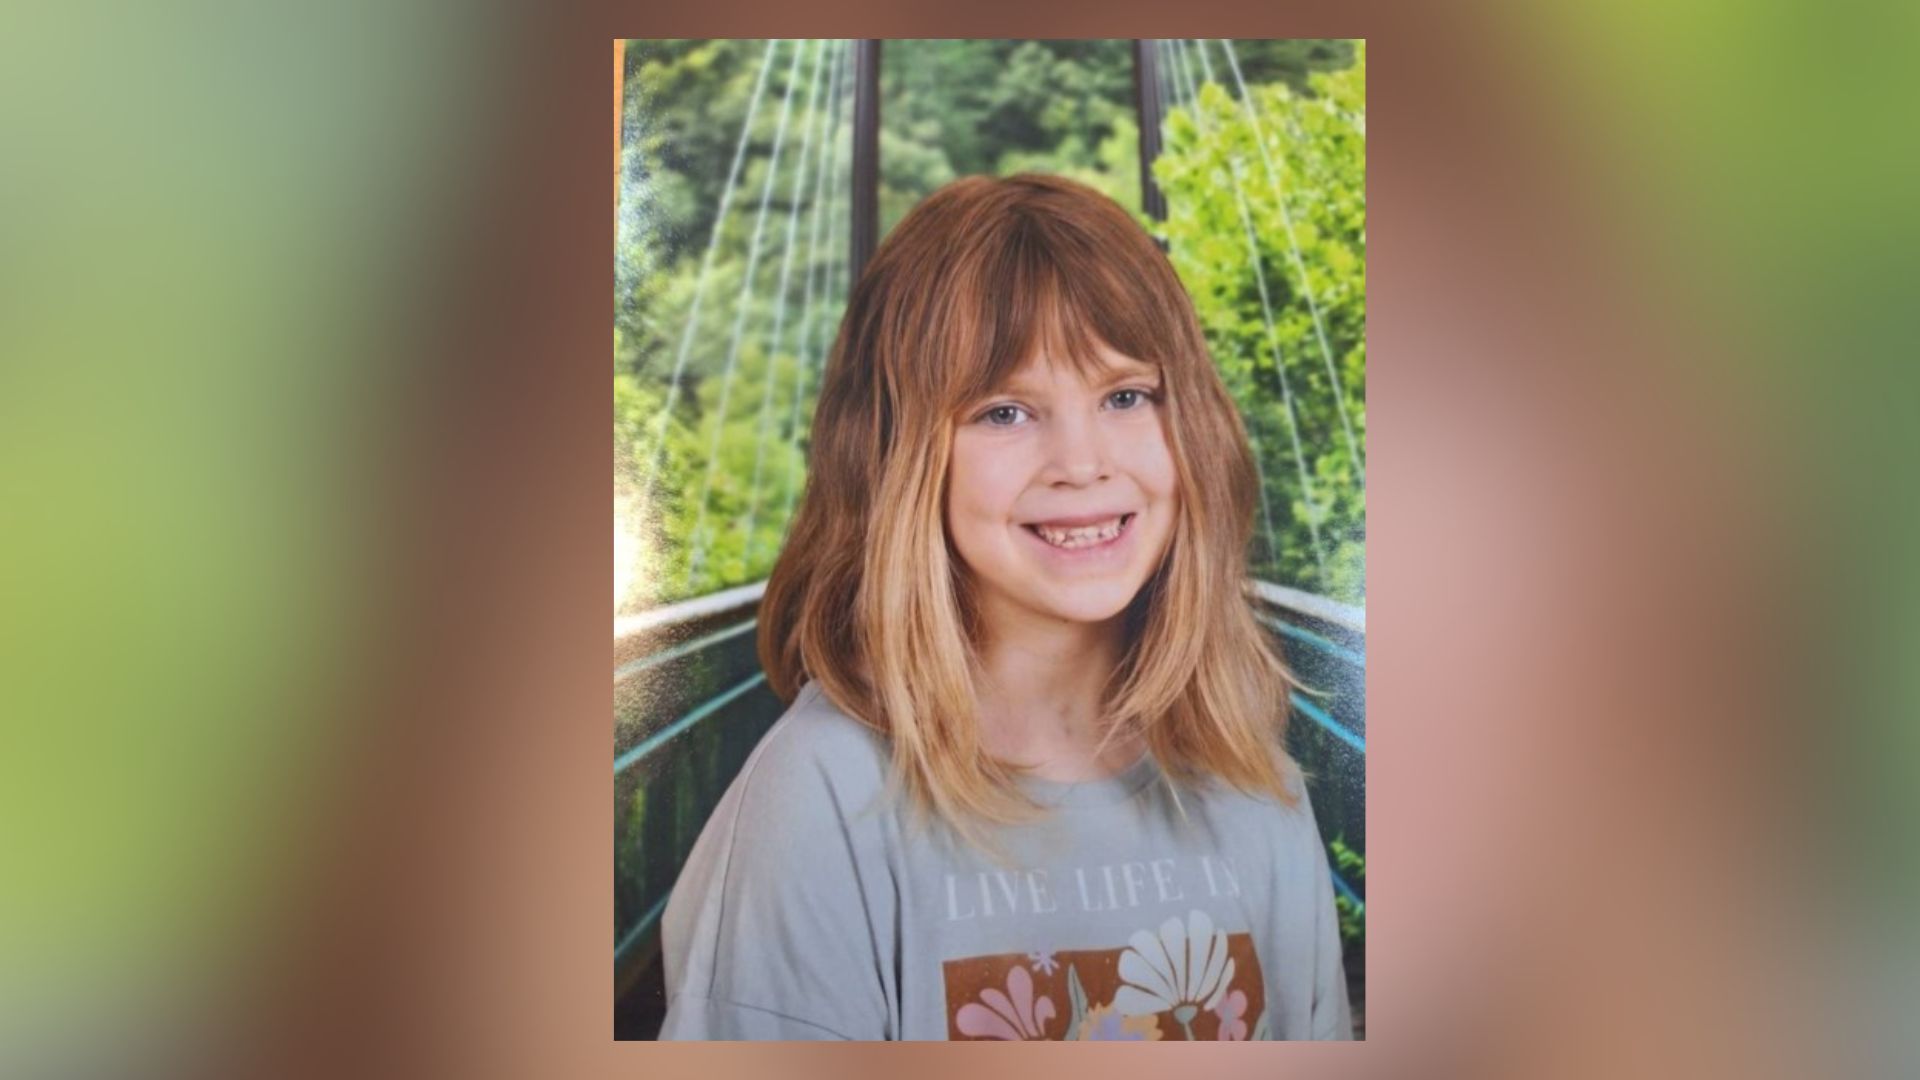 Cherokee County Family Mourns Loss of 7-Year-Old in ATV Accident